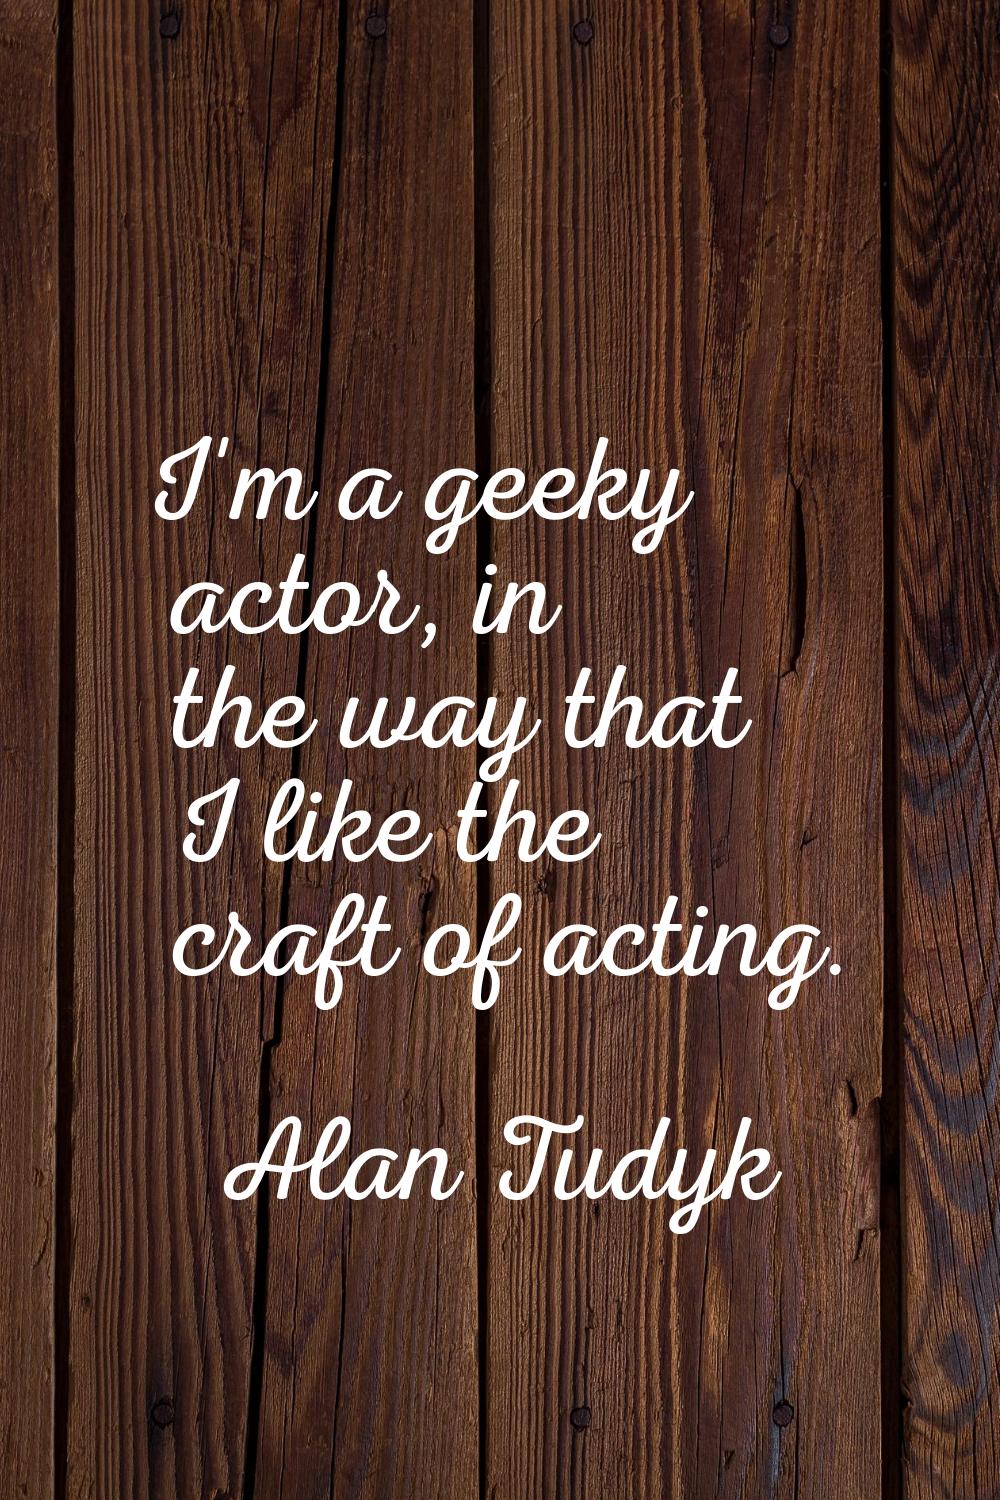 I'm a geeky actor, in the way that I like the craft of acting.